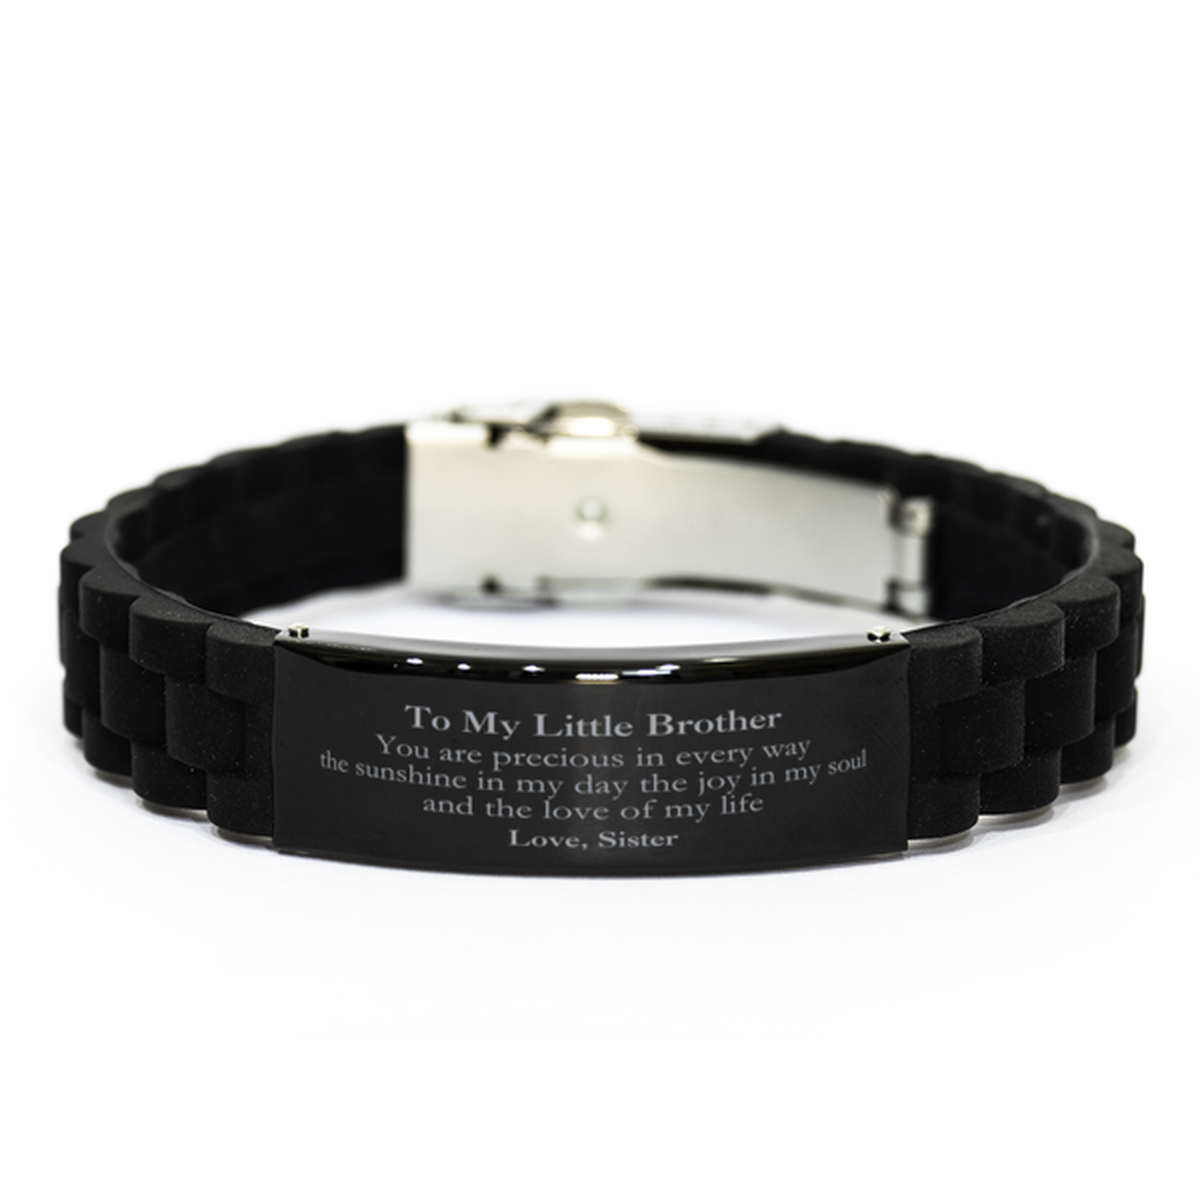 Graduation Gifts for Little Brother Black Glidelock Clasp Bracelet Present from Sister, Christmas Little Brother Birthday Gifts Little Brother You are precious in every way the sunshine in my day. Love, Sister